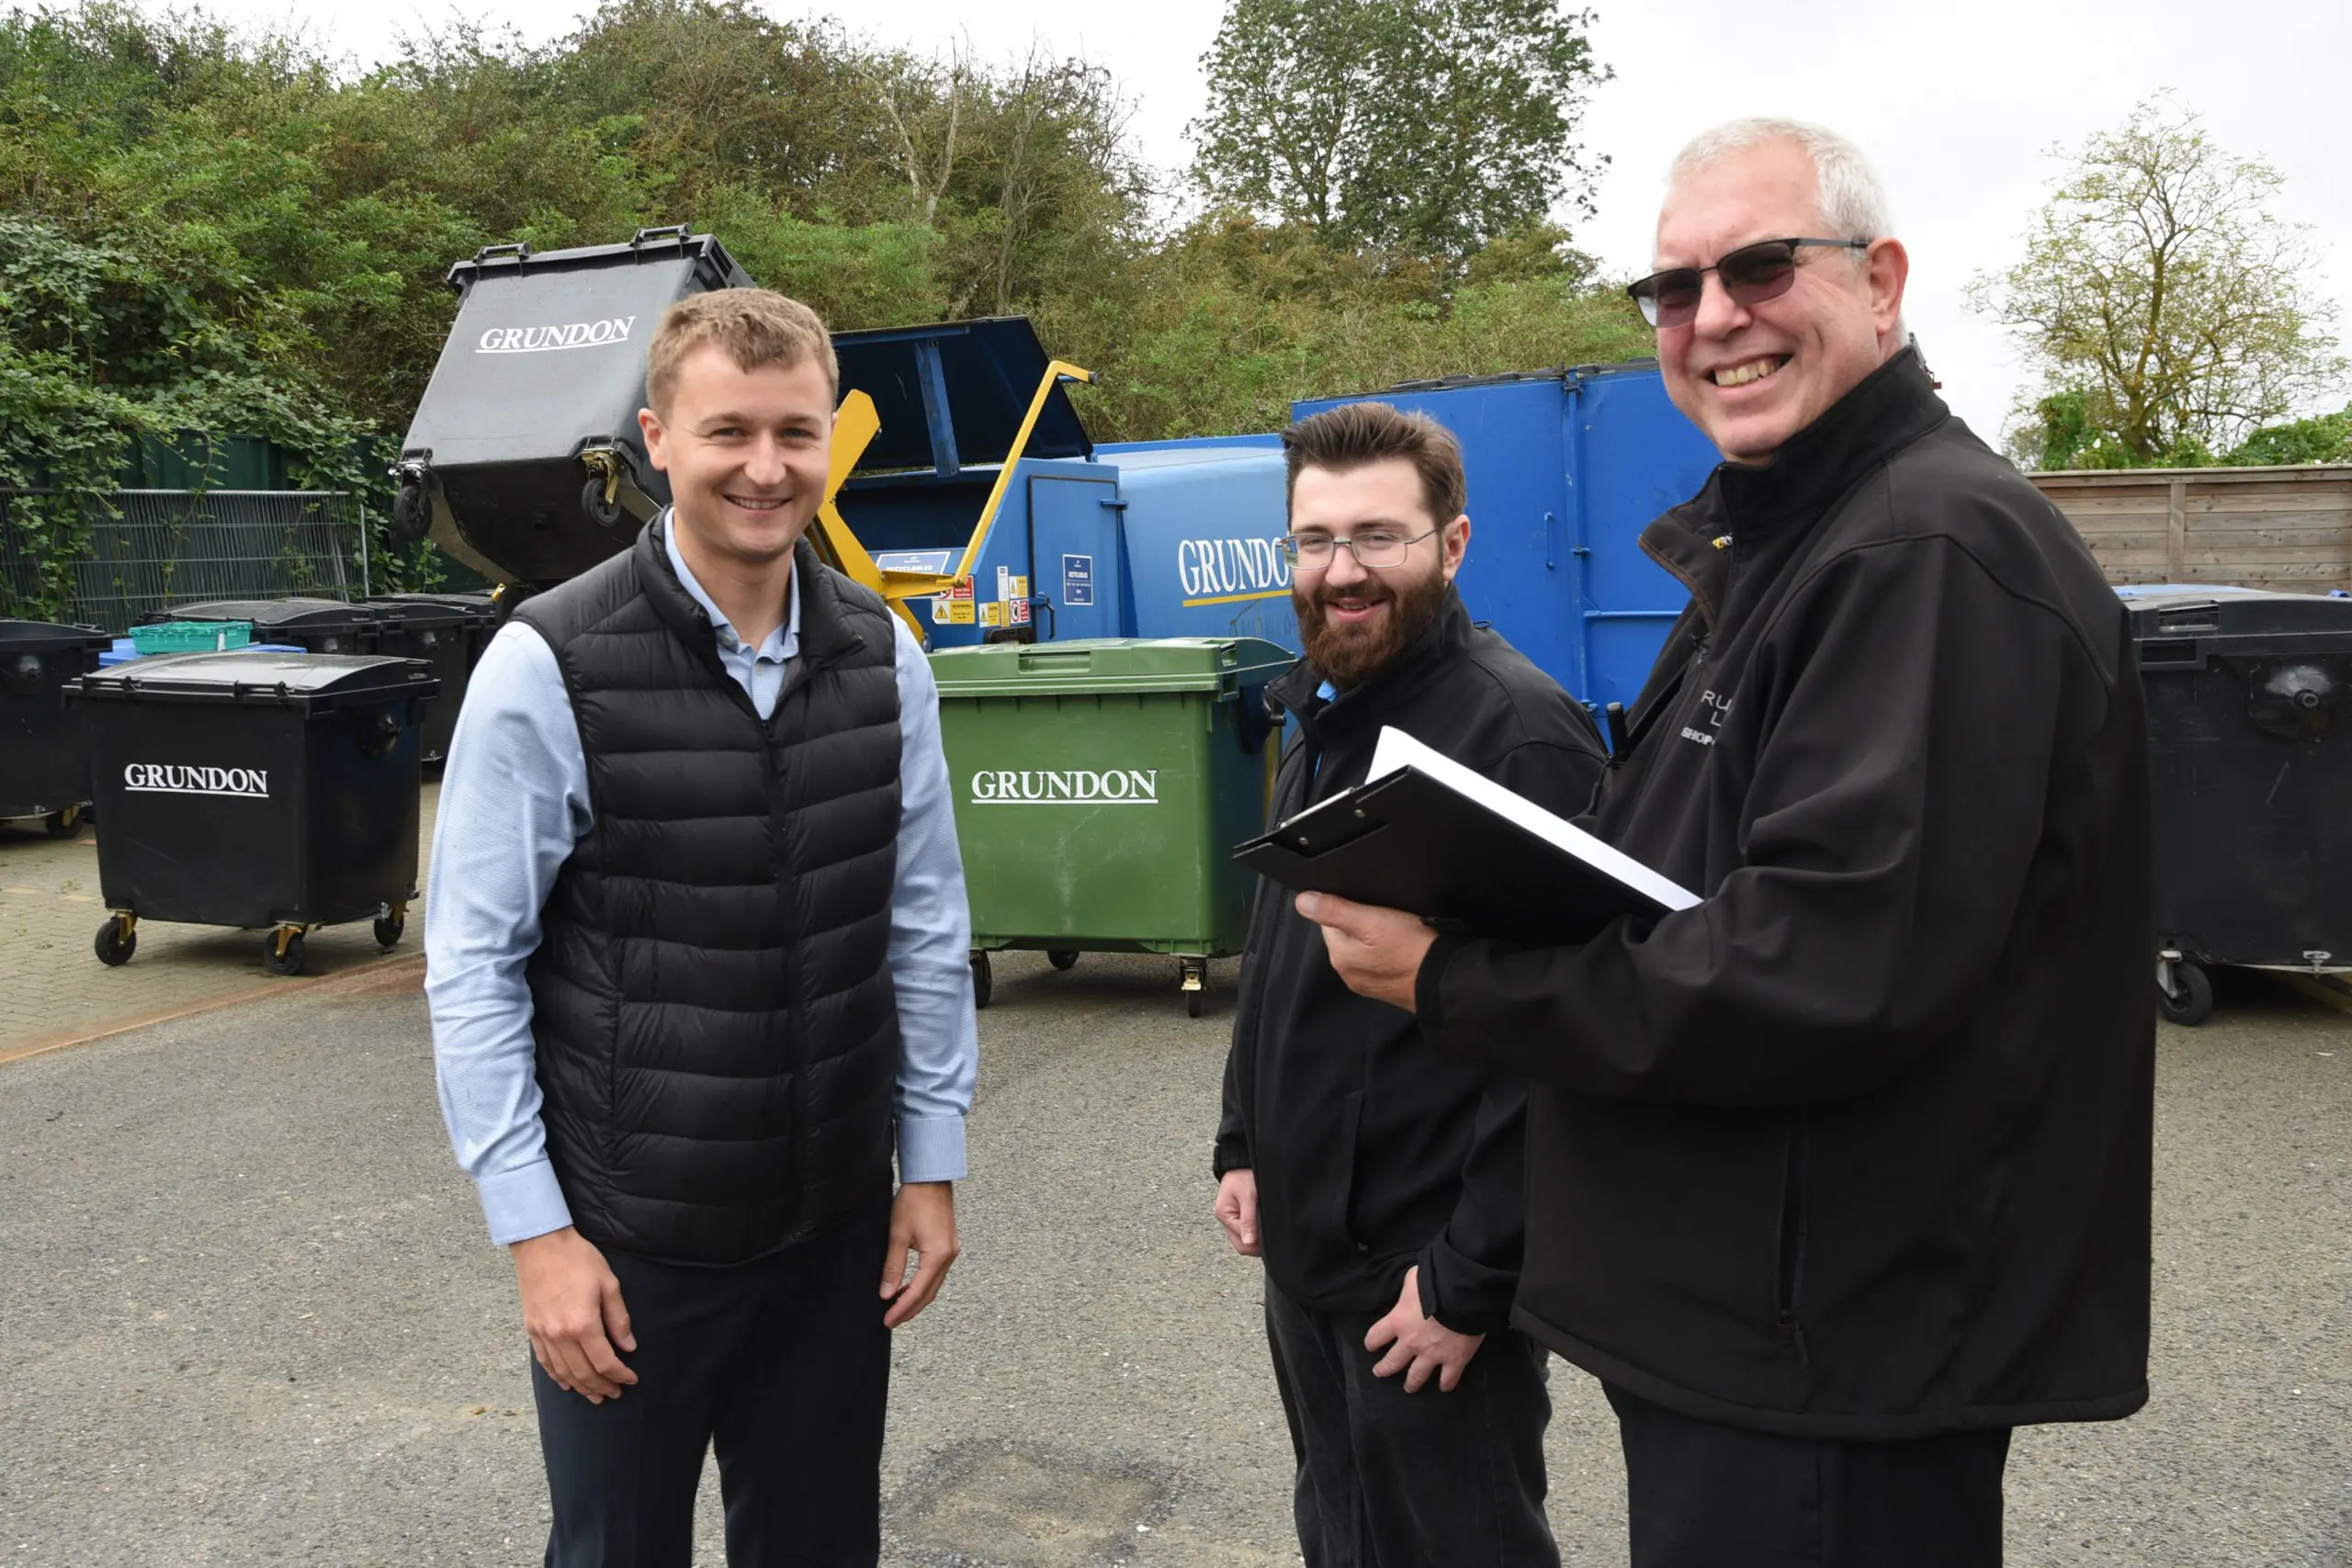 James Luckett, Jamie Denney and Alan Rademaker pictured in the service yard with Grundon’s containers and compactor